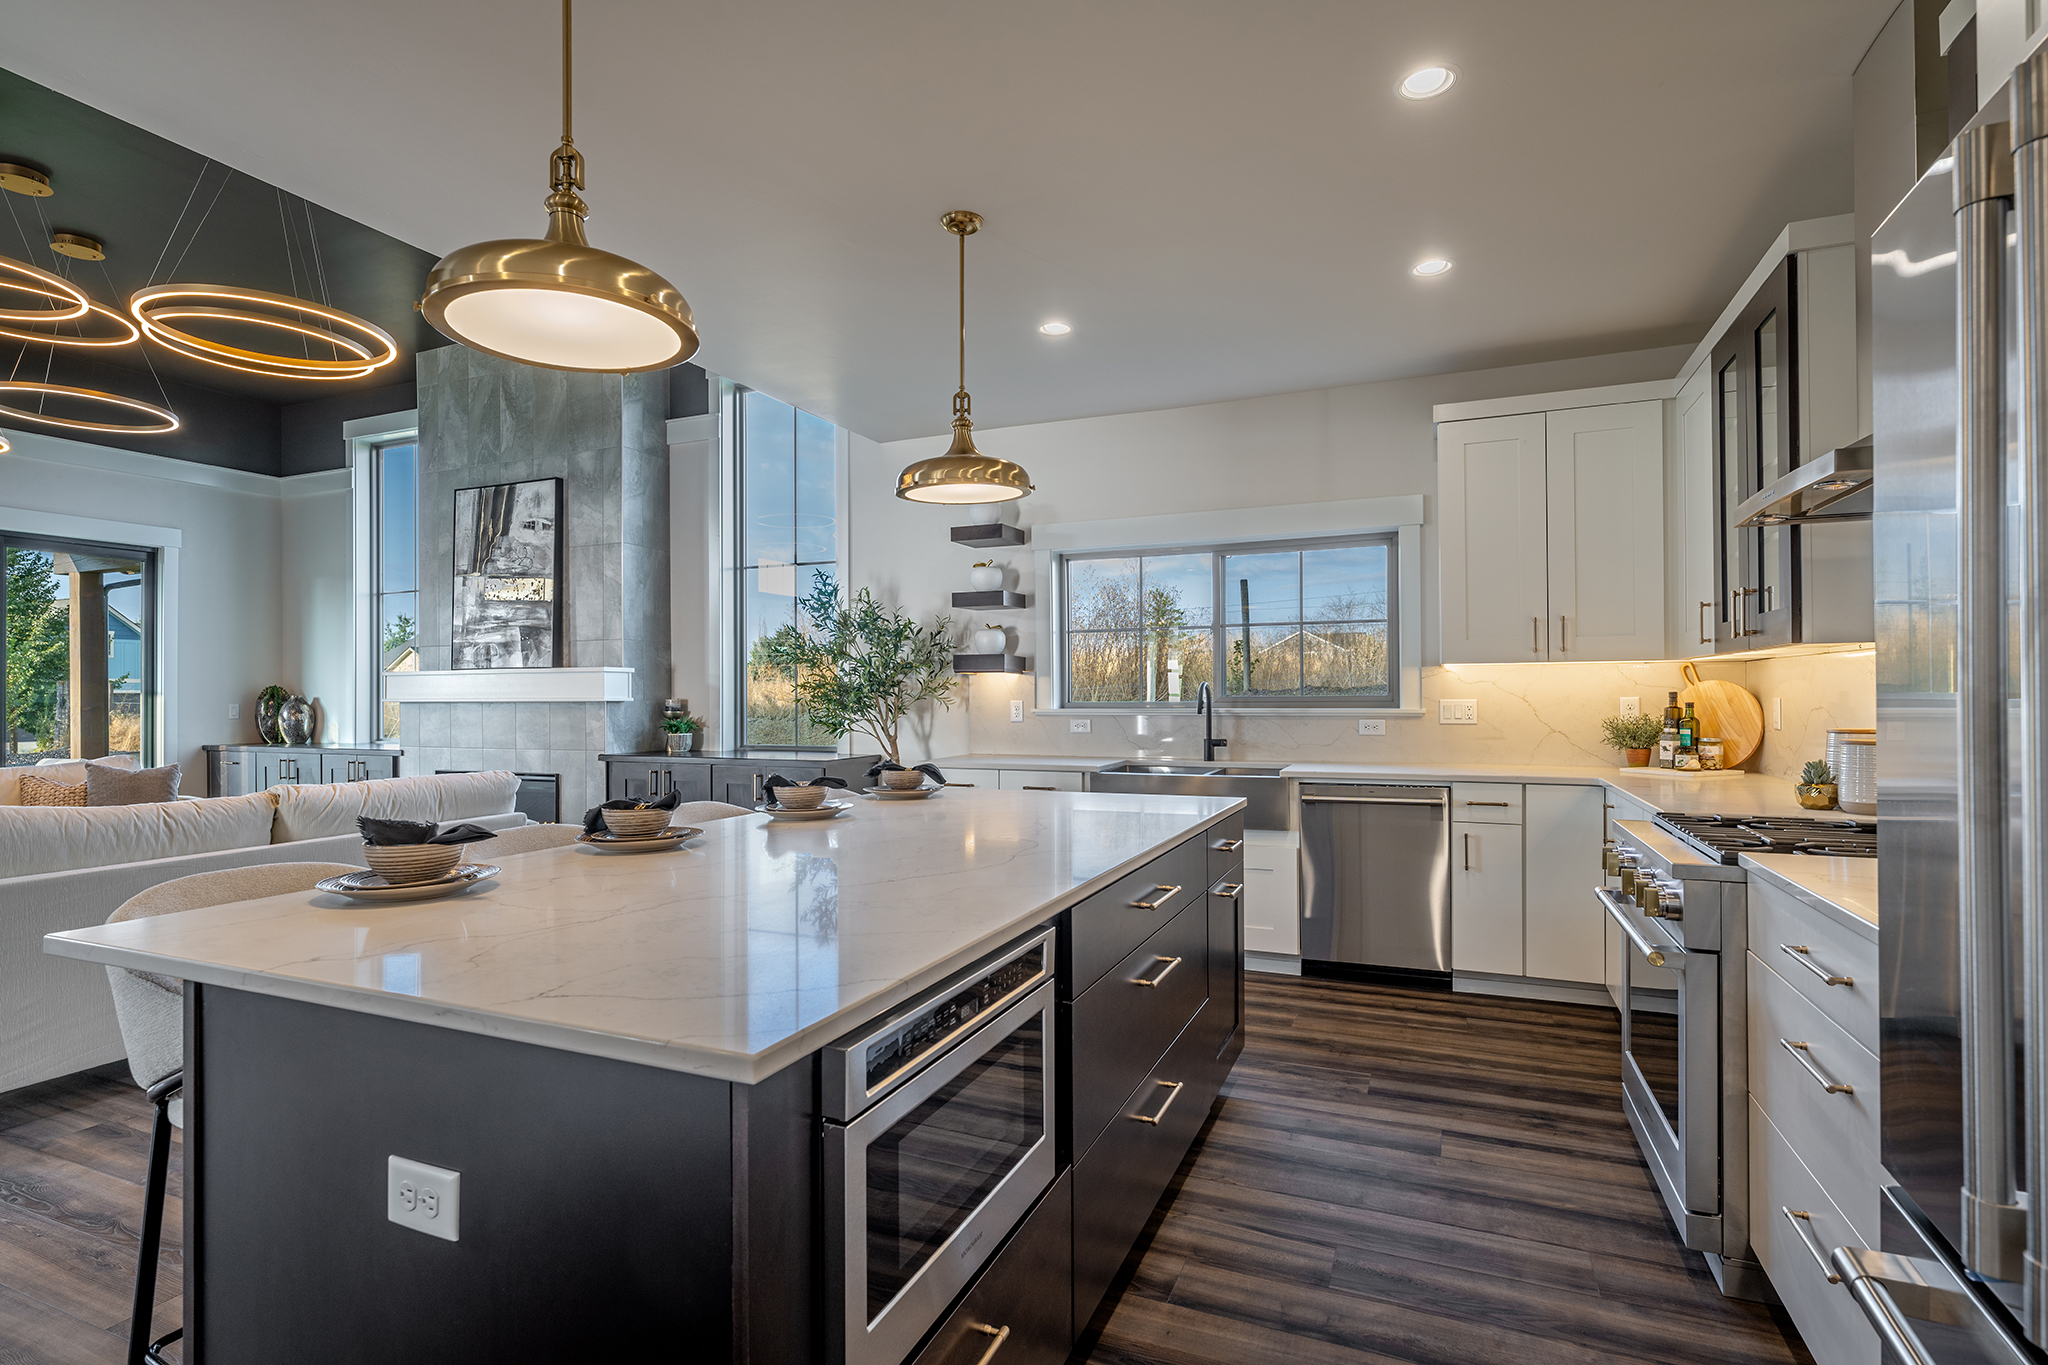 It's easy to see how this kitchen received "best of" recognition in this category.